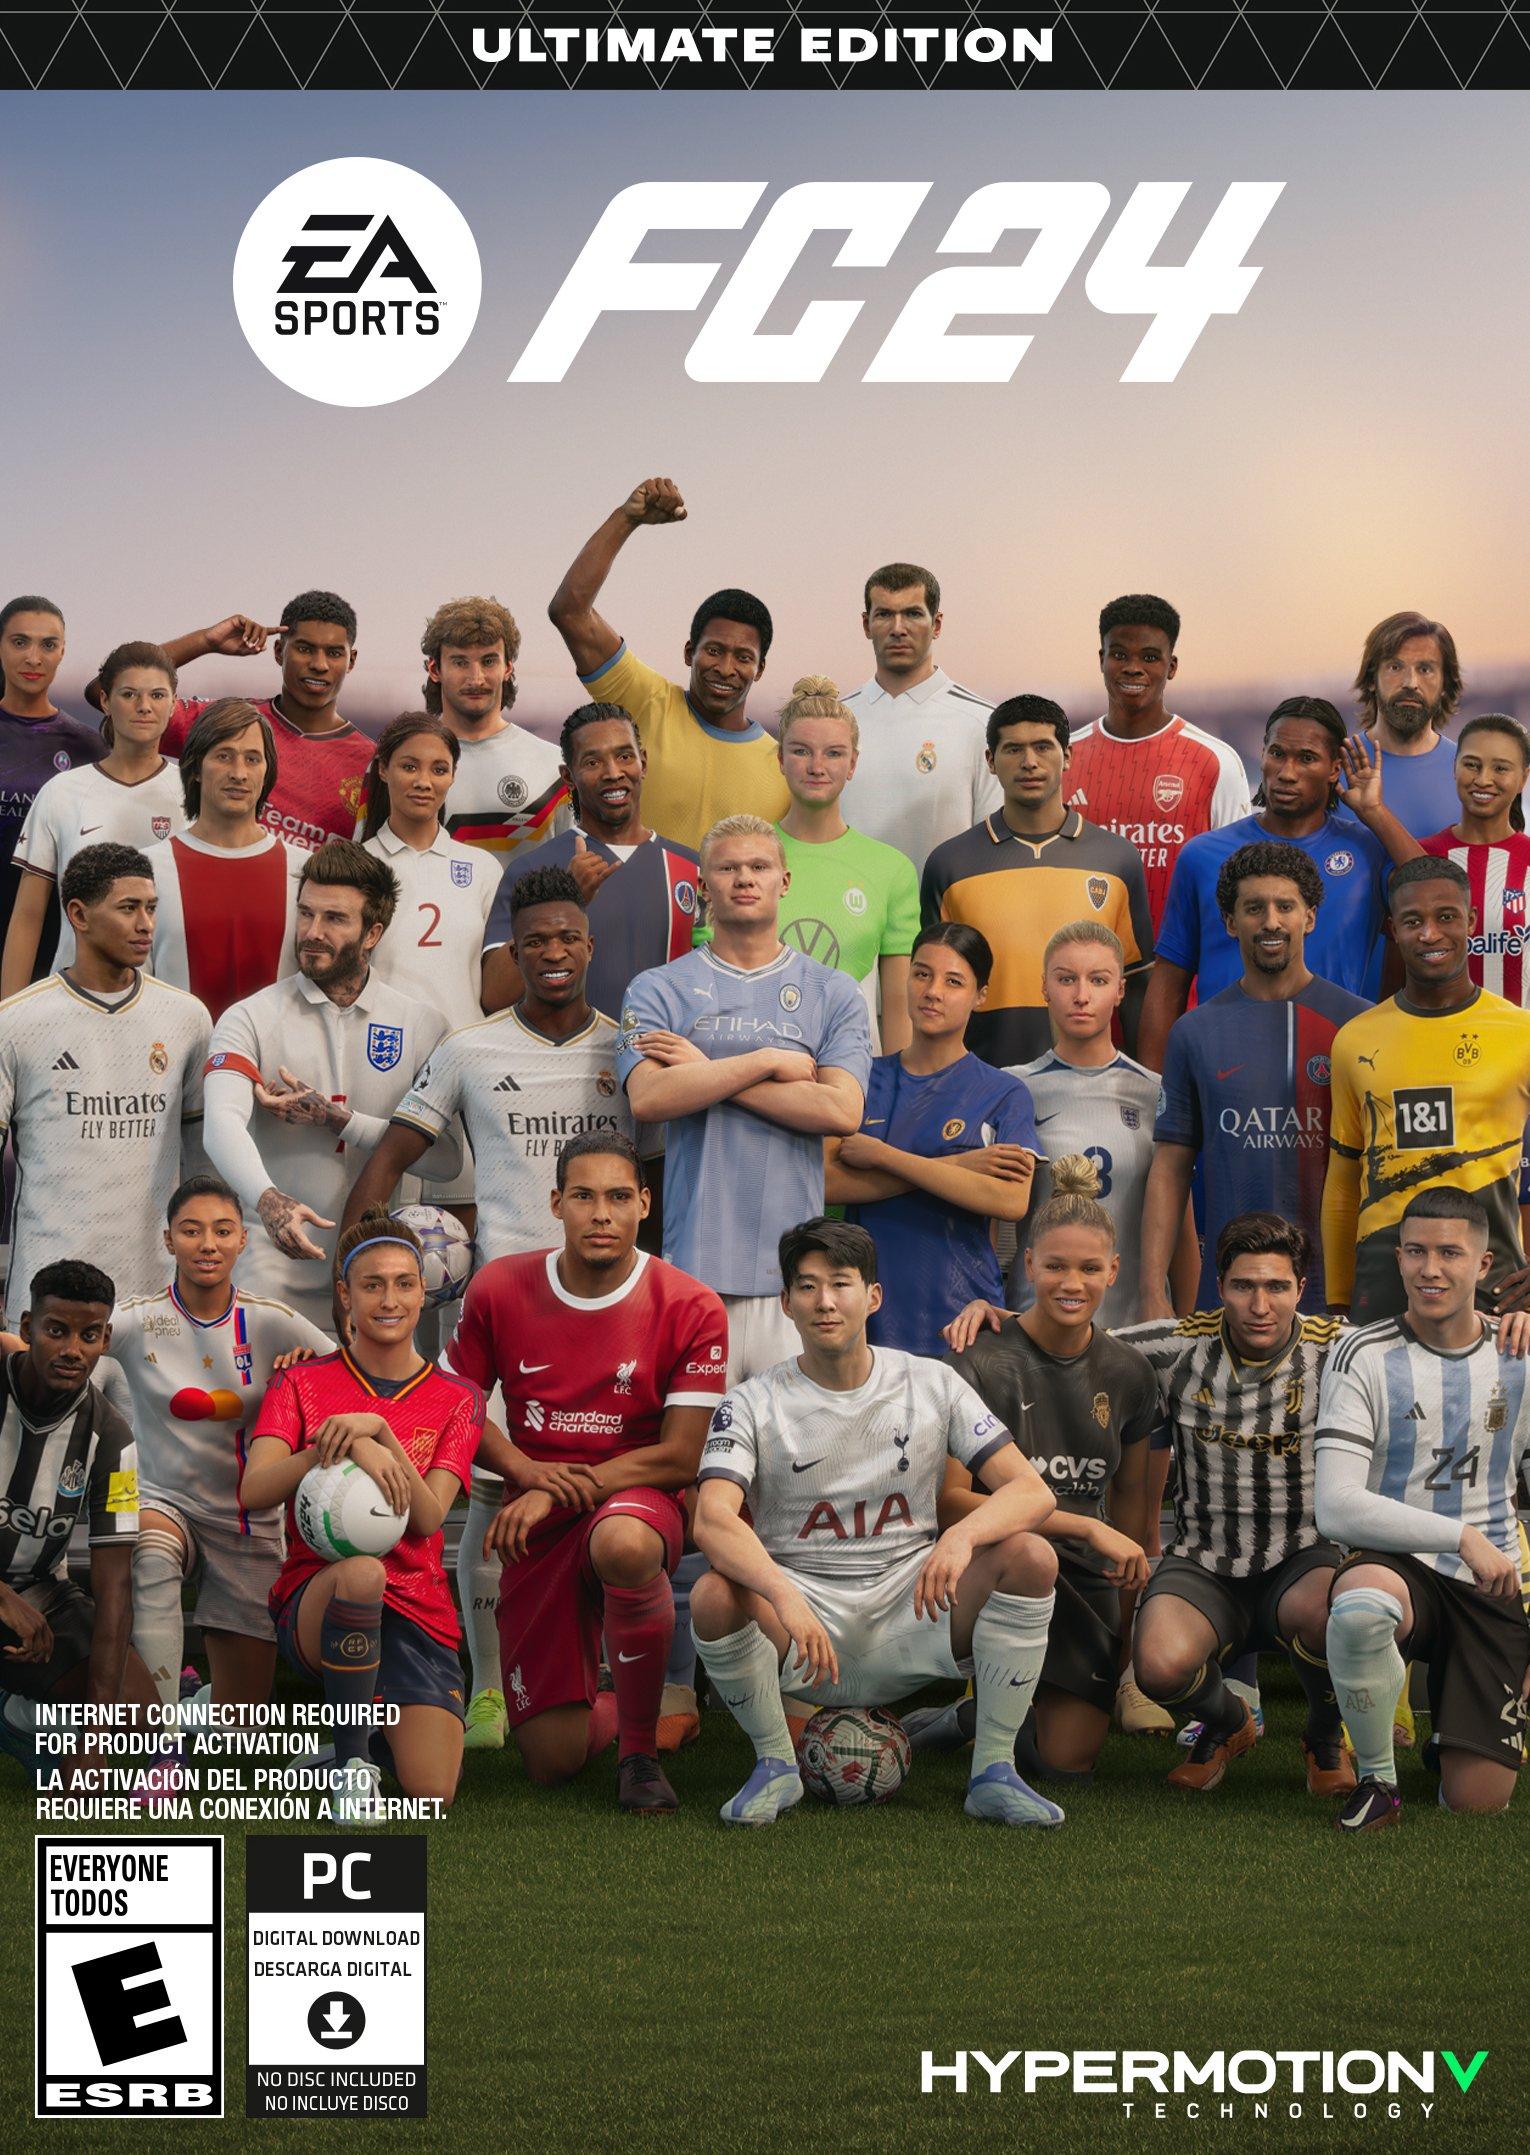 EA SPORTS FC™ 24 Ultimate Edition  Download and Buy Today - Epic Games  Store